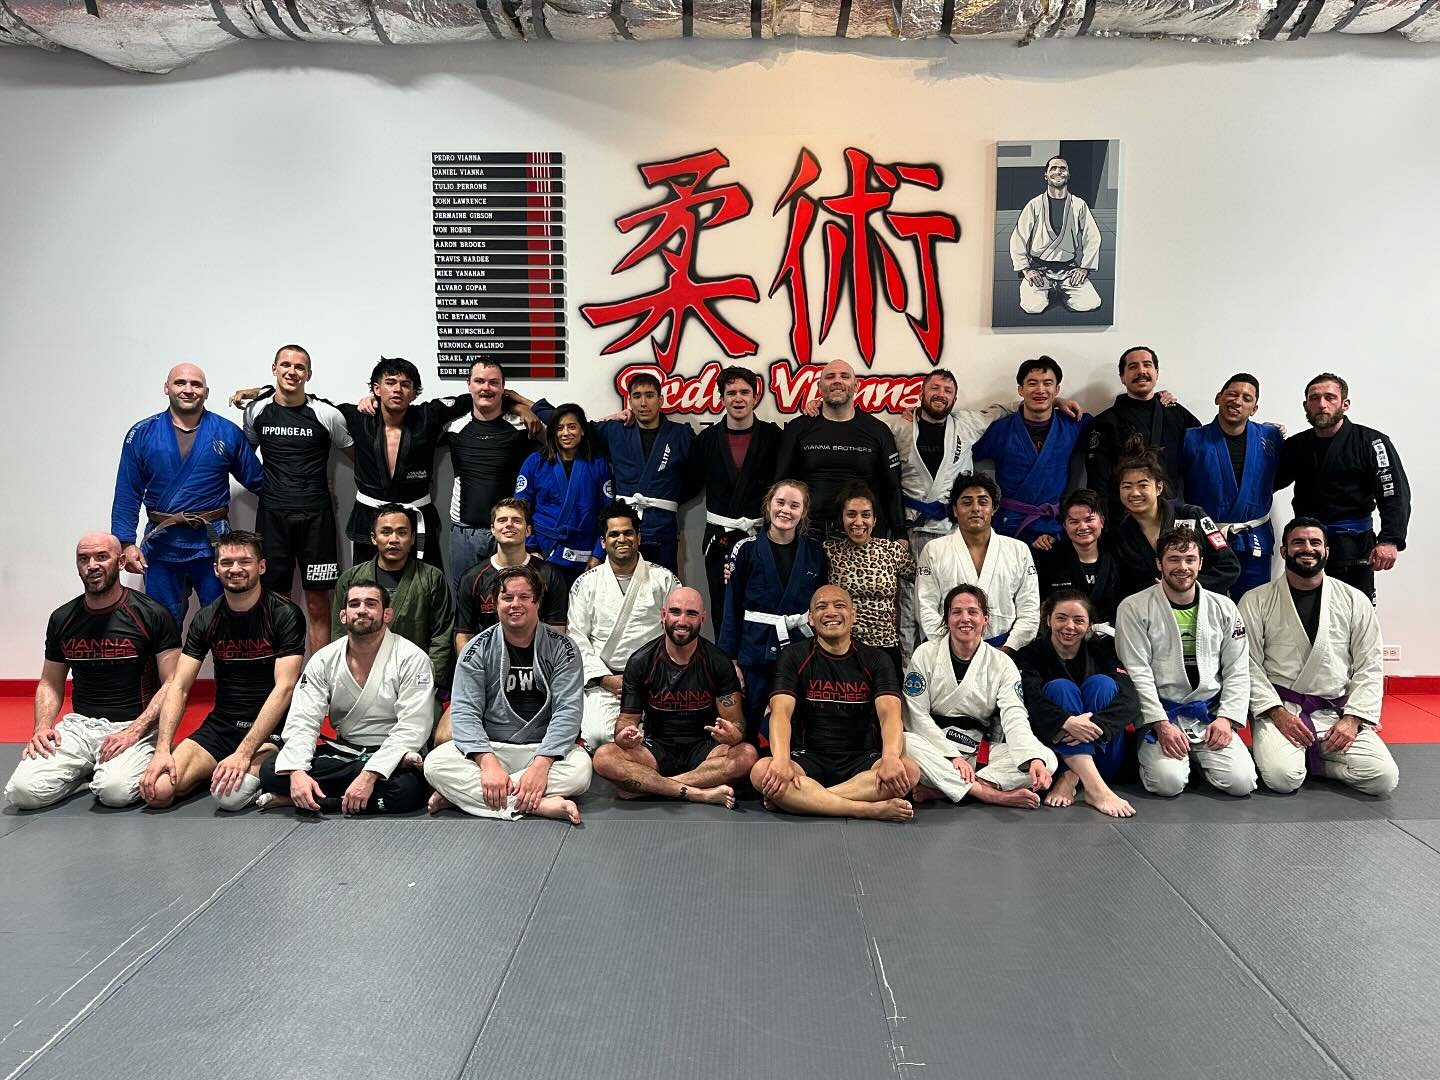 Saturdays are for OPEN MAT!!! All are welcome! Join us on Saturdays at 11:00am Gi and No Gi! 🤙🤙🤙🤙